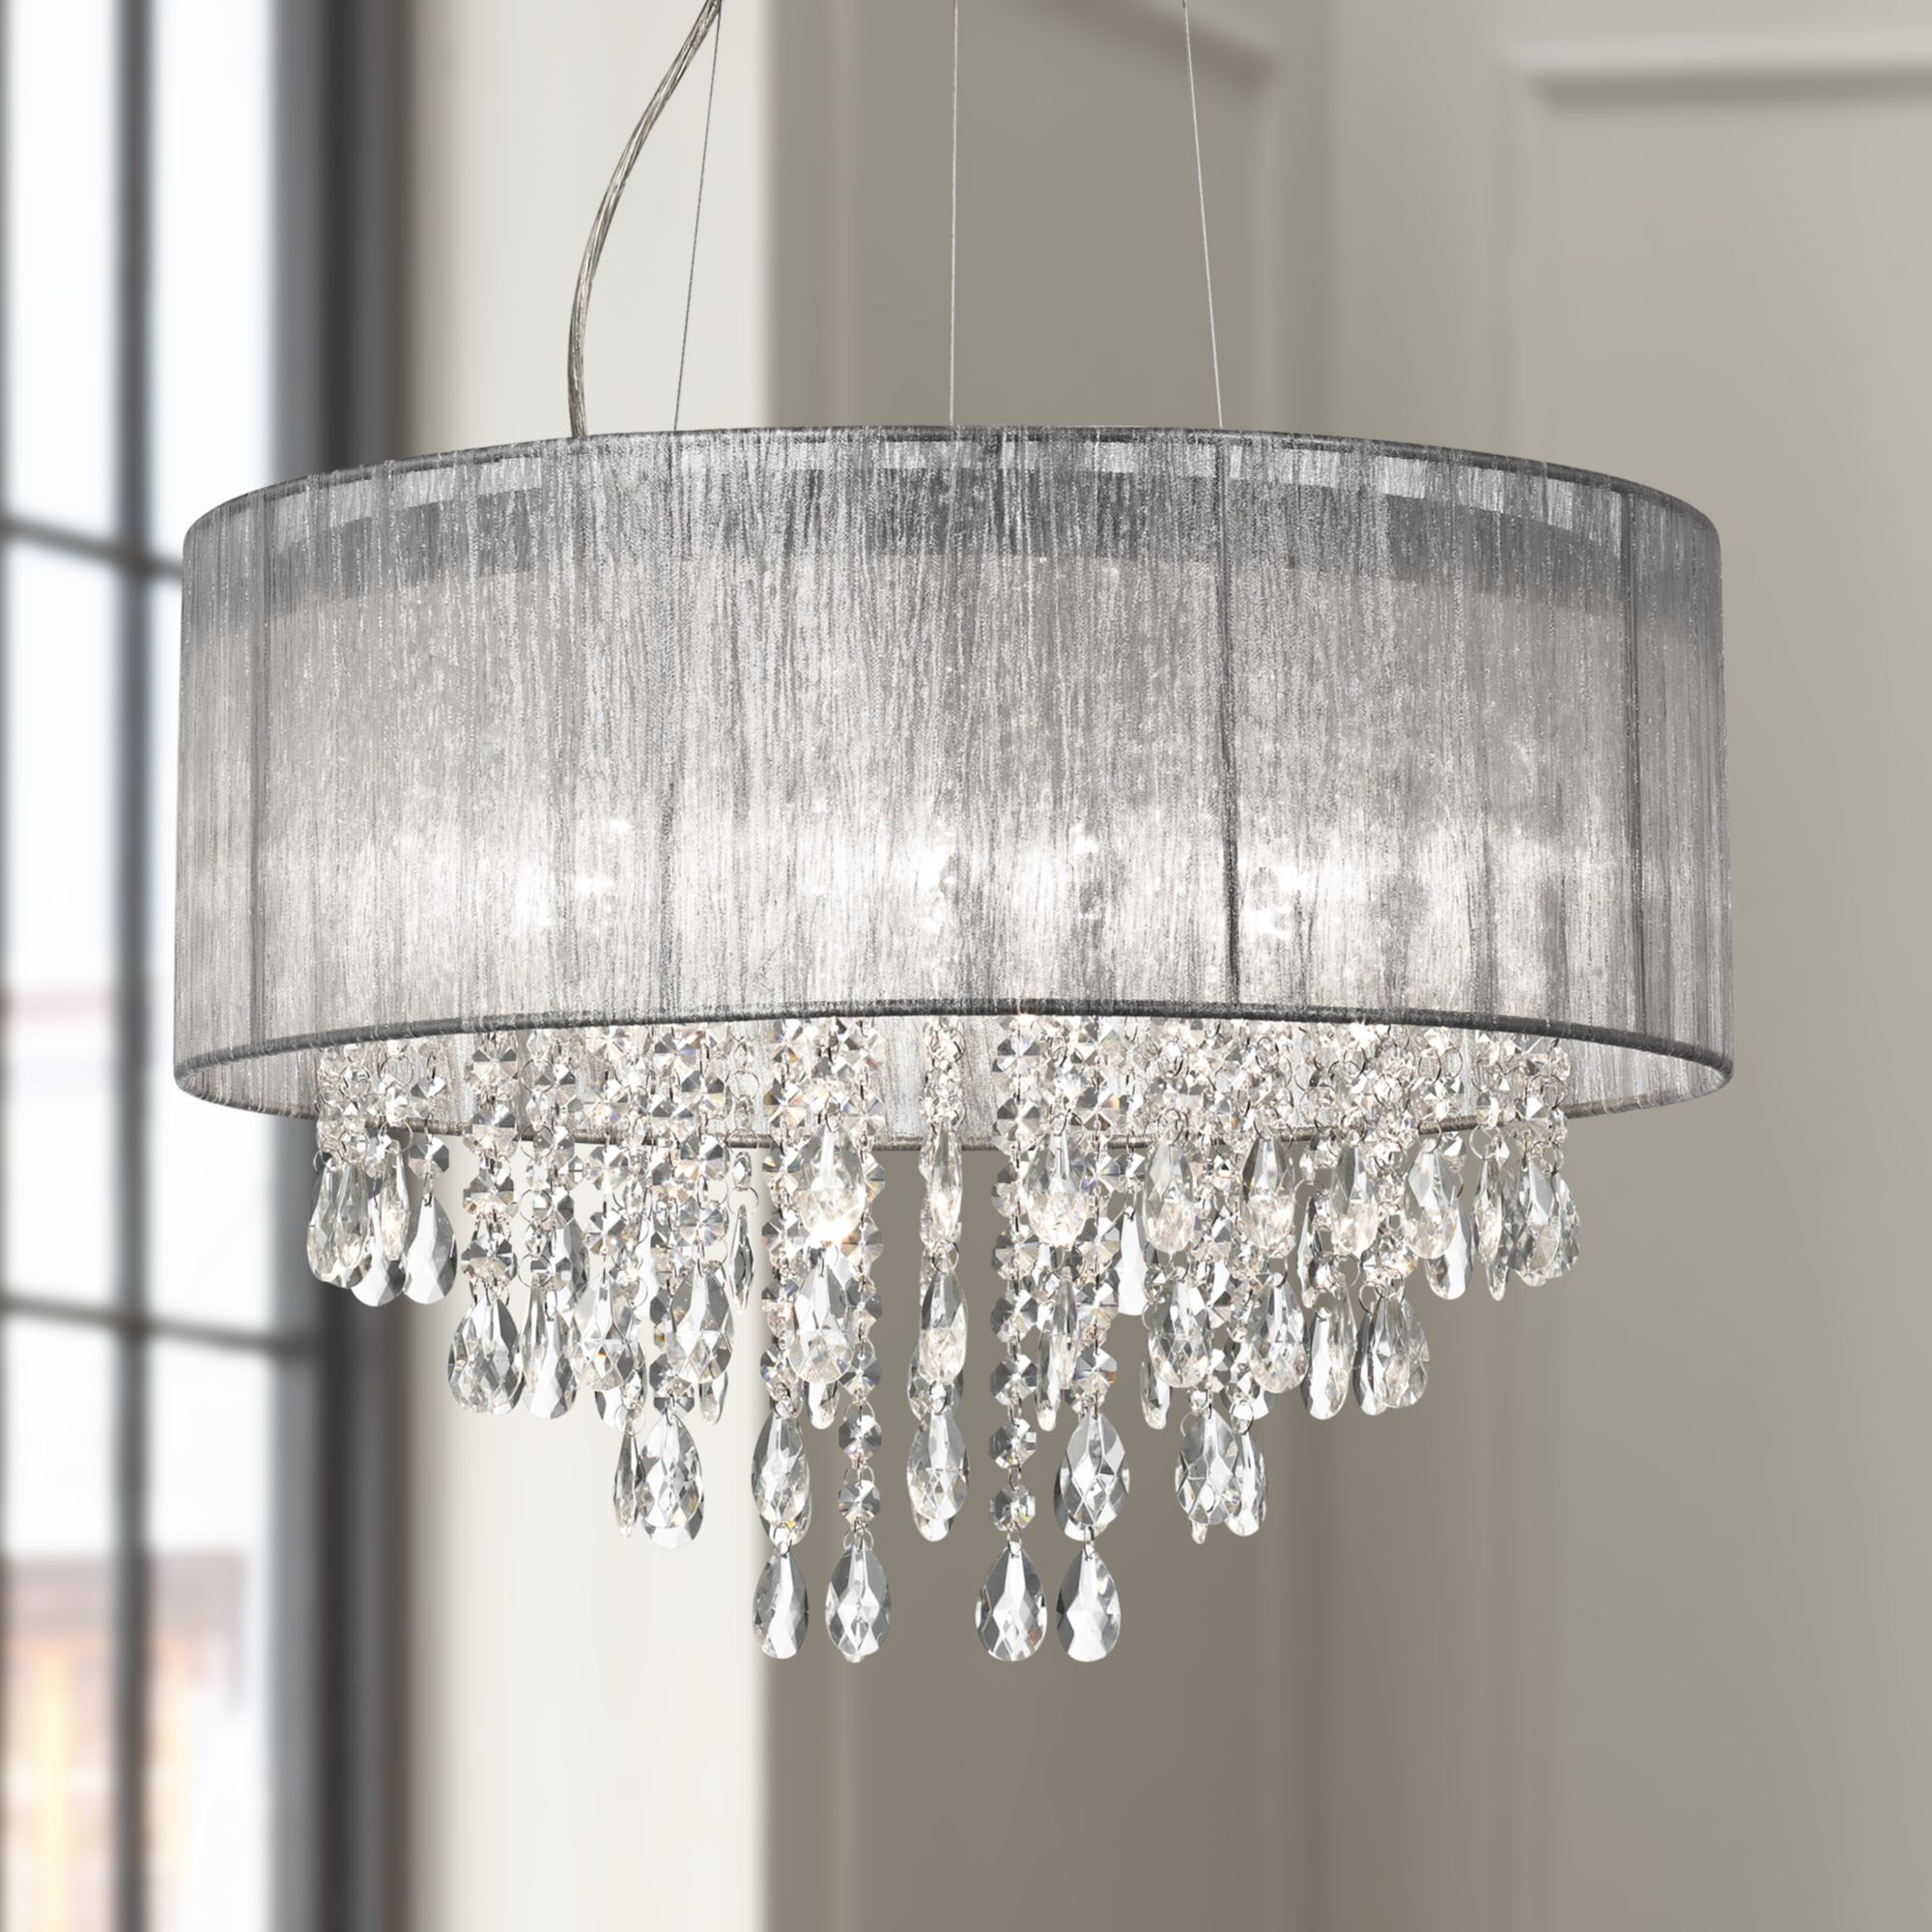 Possini Euro Design Chrome Drum Chandelier 20" Wide Modern Intended For Chrome And Crystal Led Chandeliers (View 5 of 15)